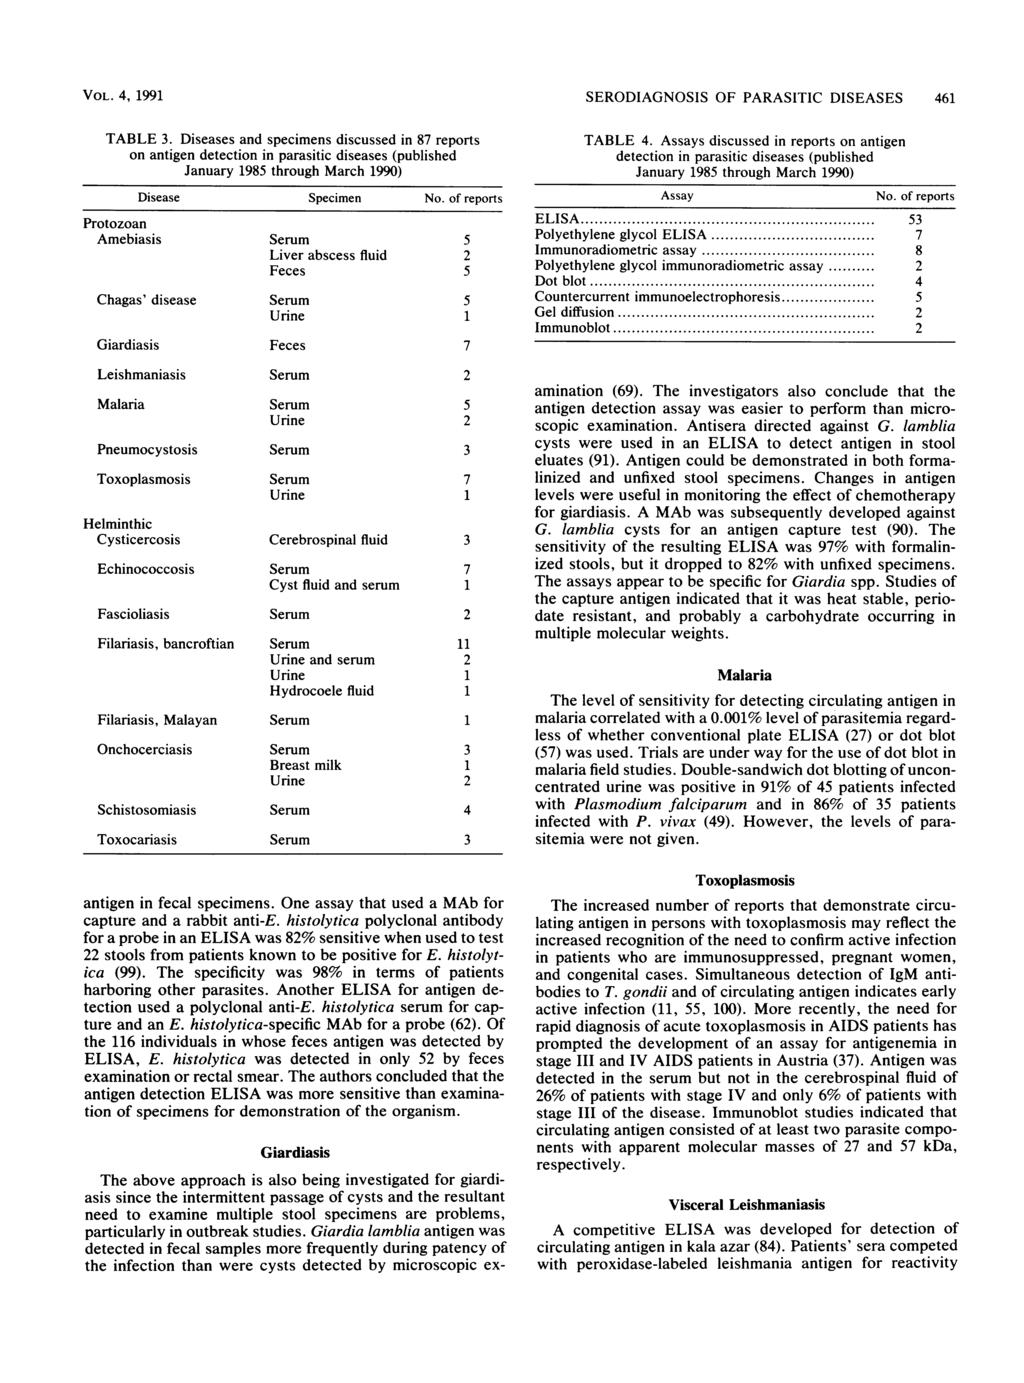 VOL. 4, 1991 TABLE 3. Diseases and specimens discussed in 87 reports on antigen detection in parasitic diseases (published January 1985 through March 1990) Disease Specimen No.